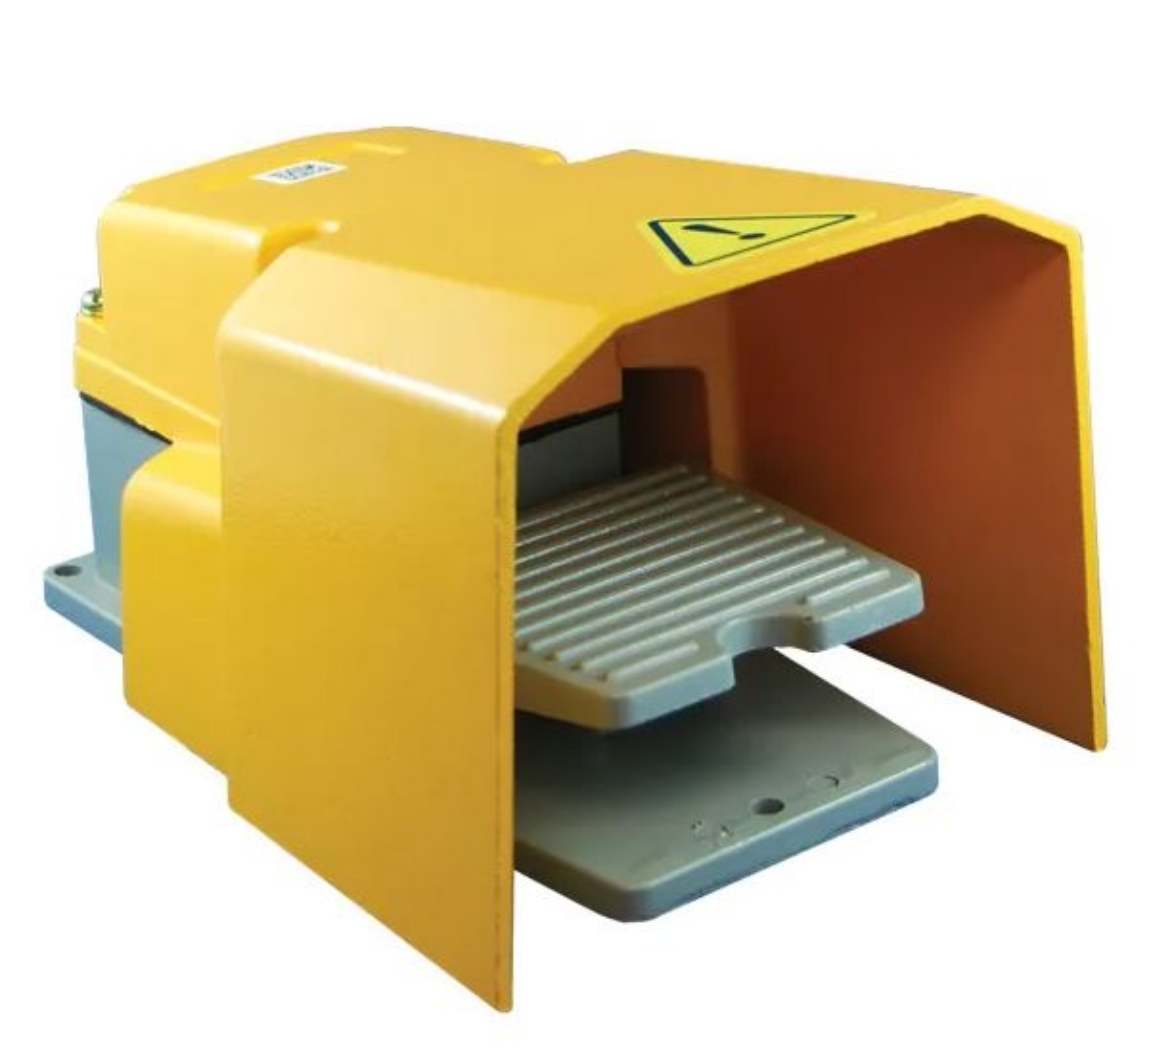 Picture of FOOT SWITCH, YELLOW, 1 PEDAL, ALUMINIUM BODY & GUARD, IP54, SINGLE PHASE (TO SUIT ITM BENCH GRINDERS)